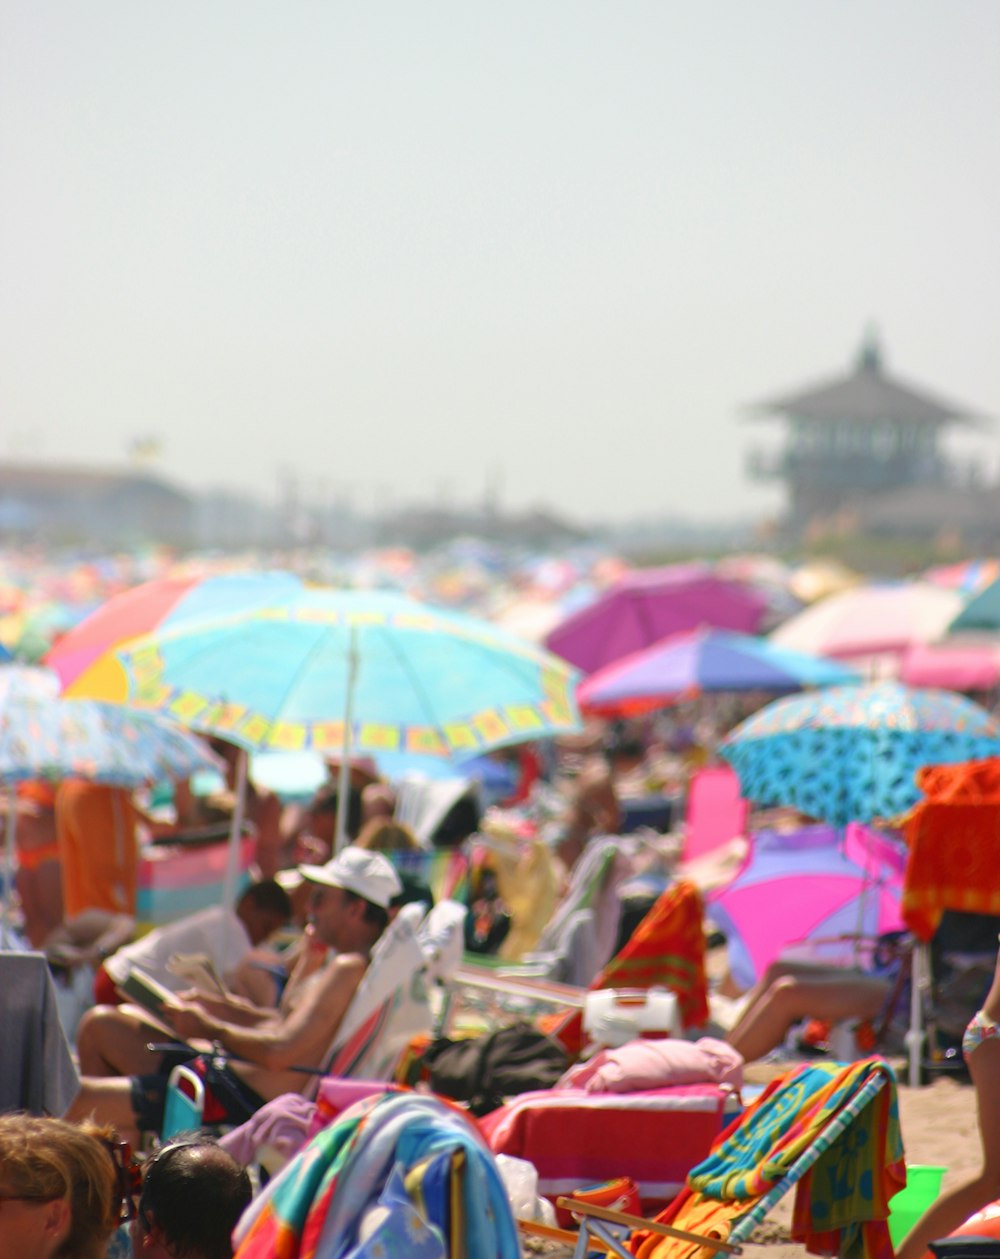 a crowd of people sit under umbrellas at a beach